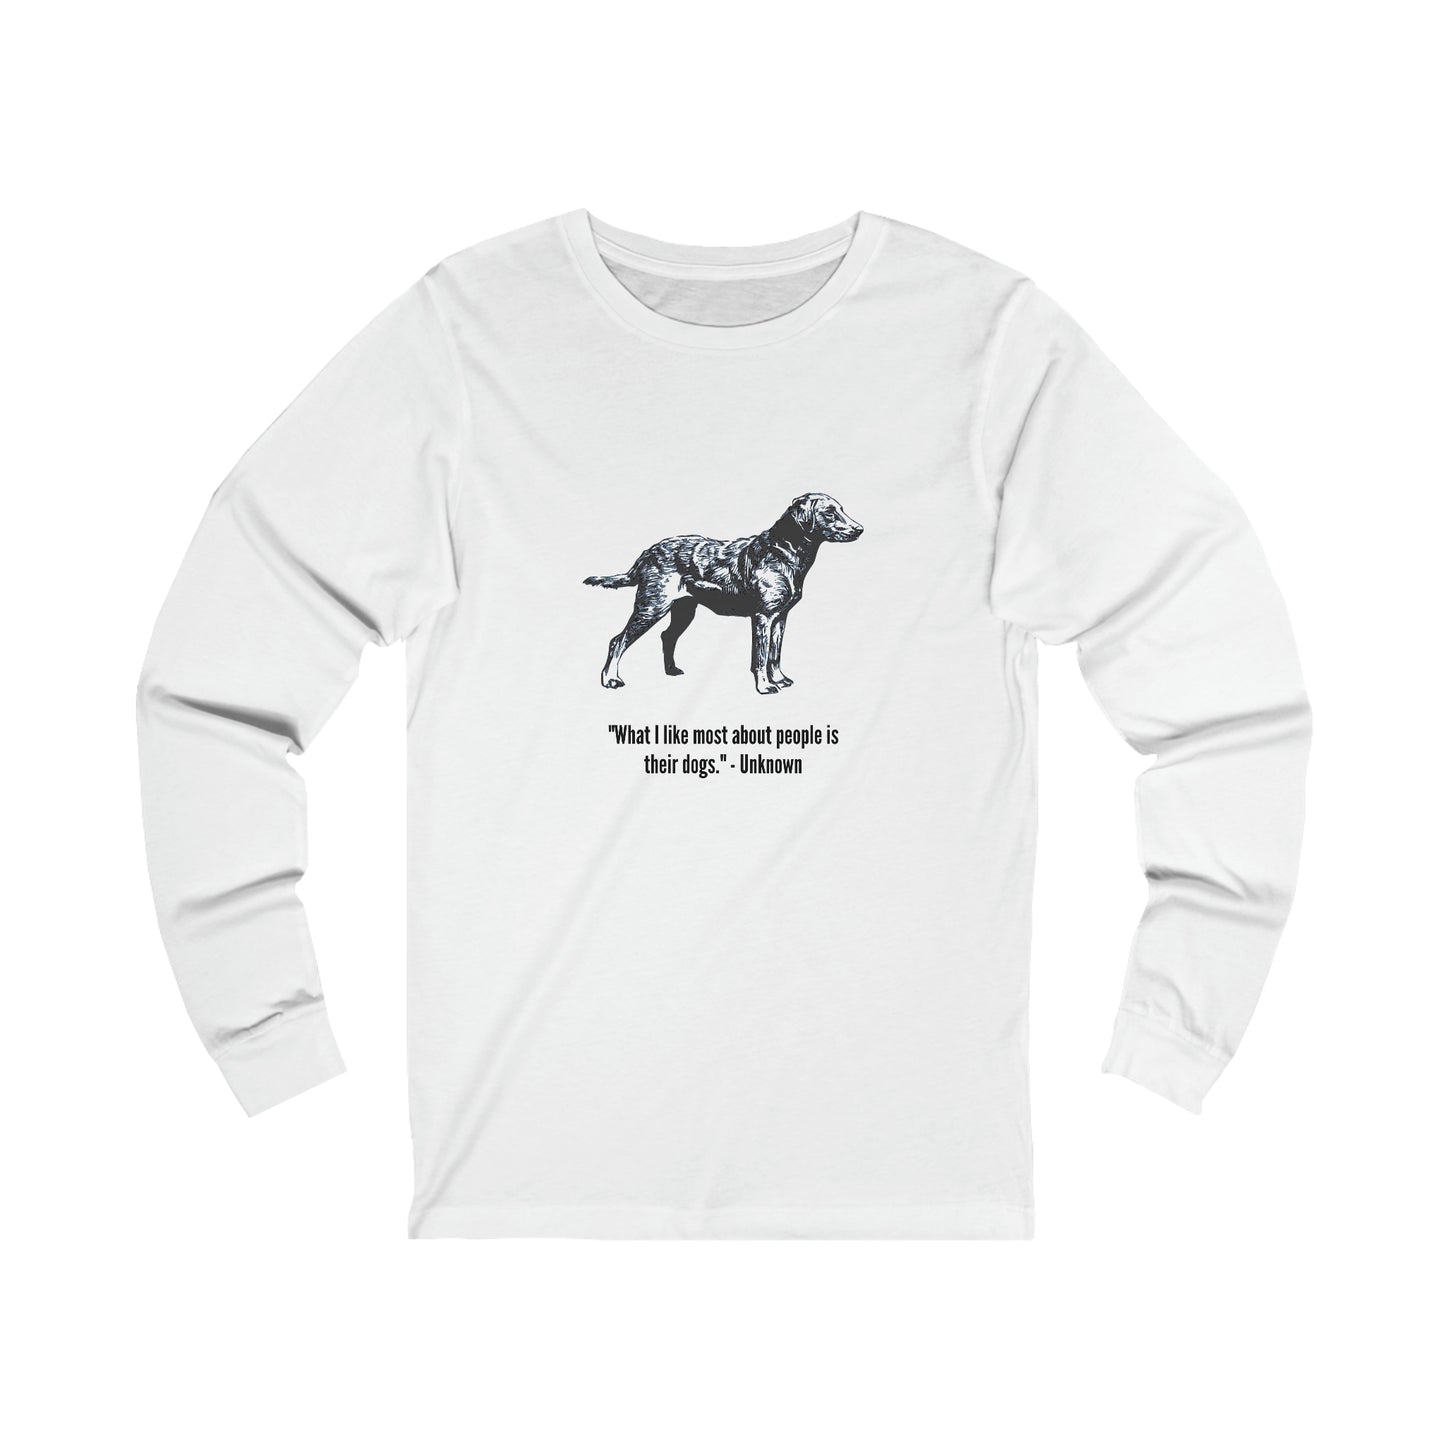 "What I like About Most People is Their Dog" Long Sleeve Shirt